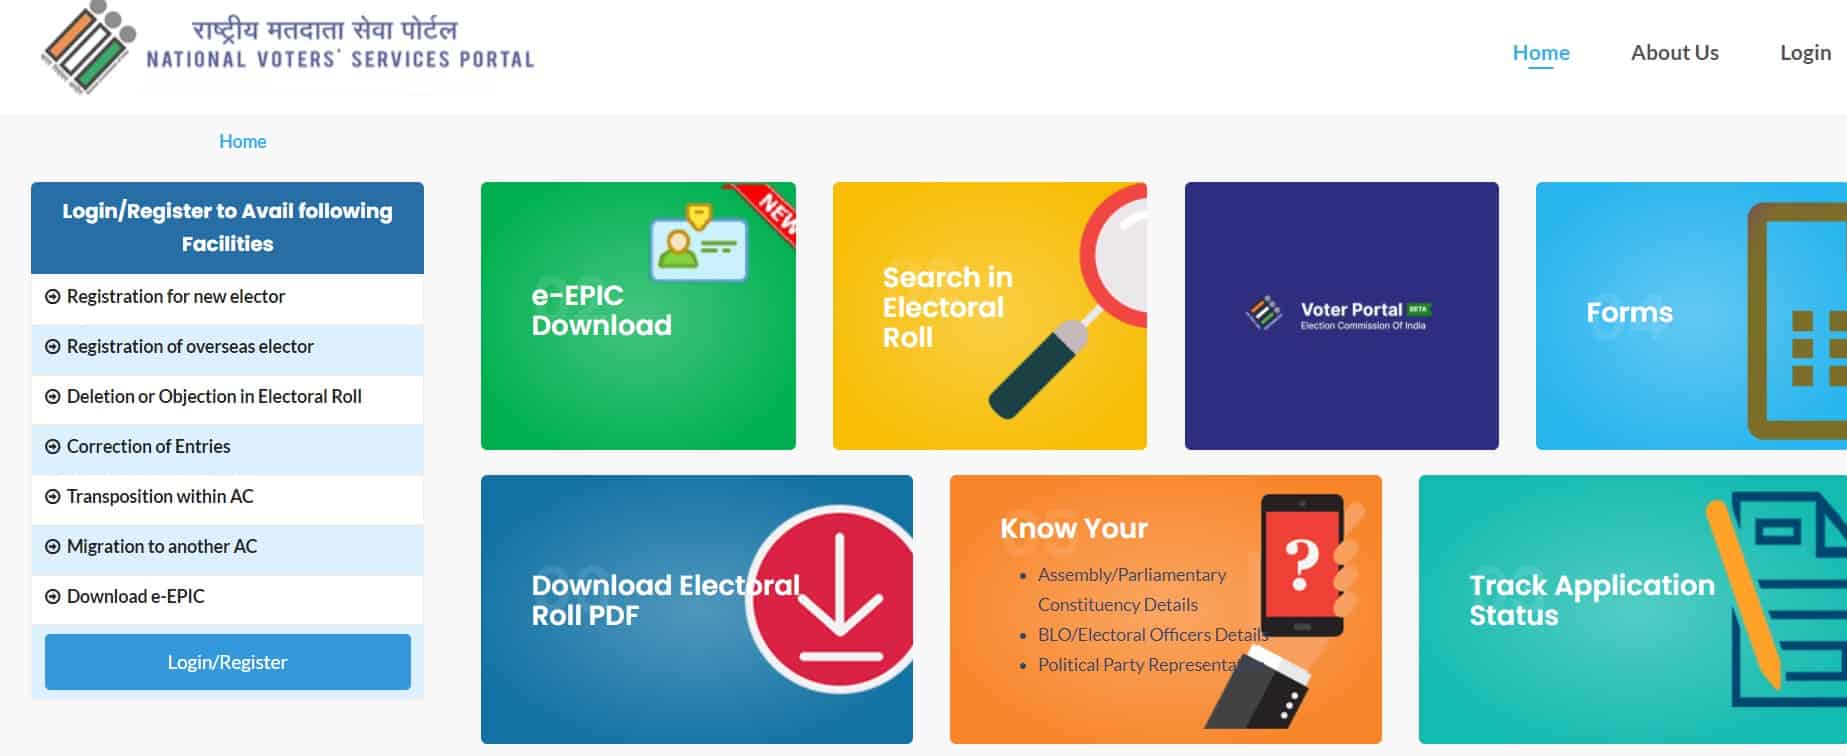 national-voters-services-portal